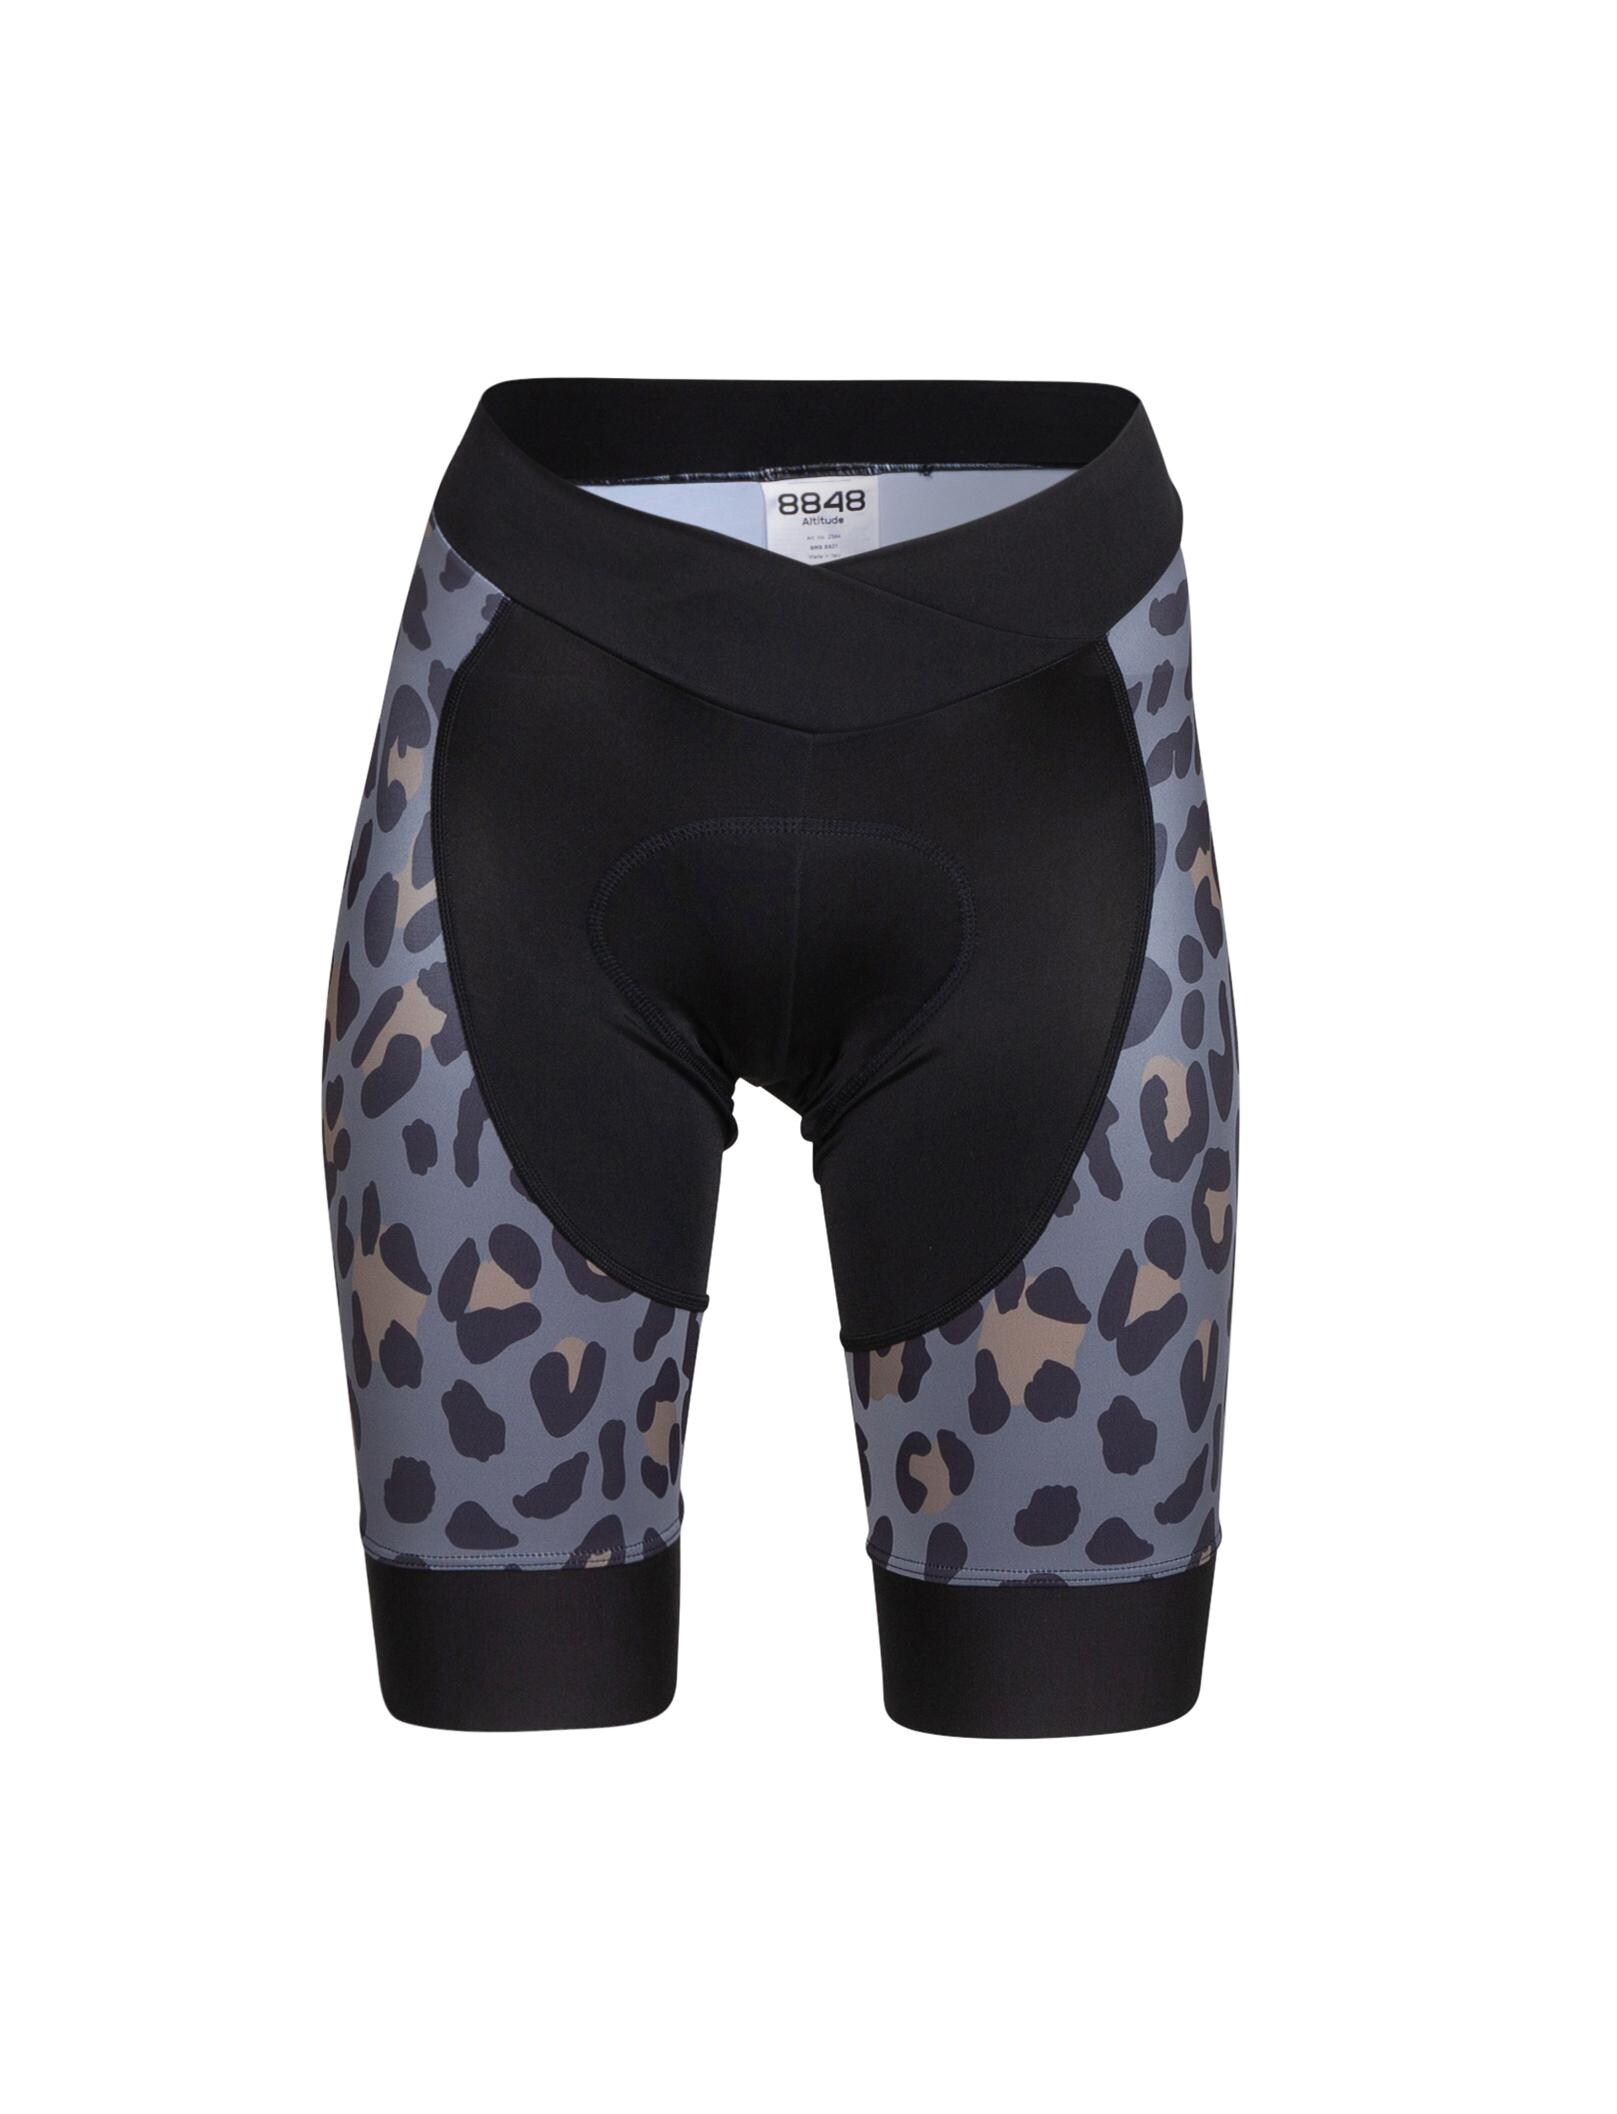 Leopard Ladies Padded Cycling Shorts Compression Women's Road Bike Female Shorts 